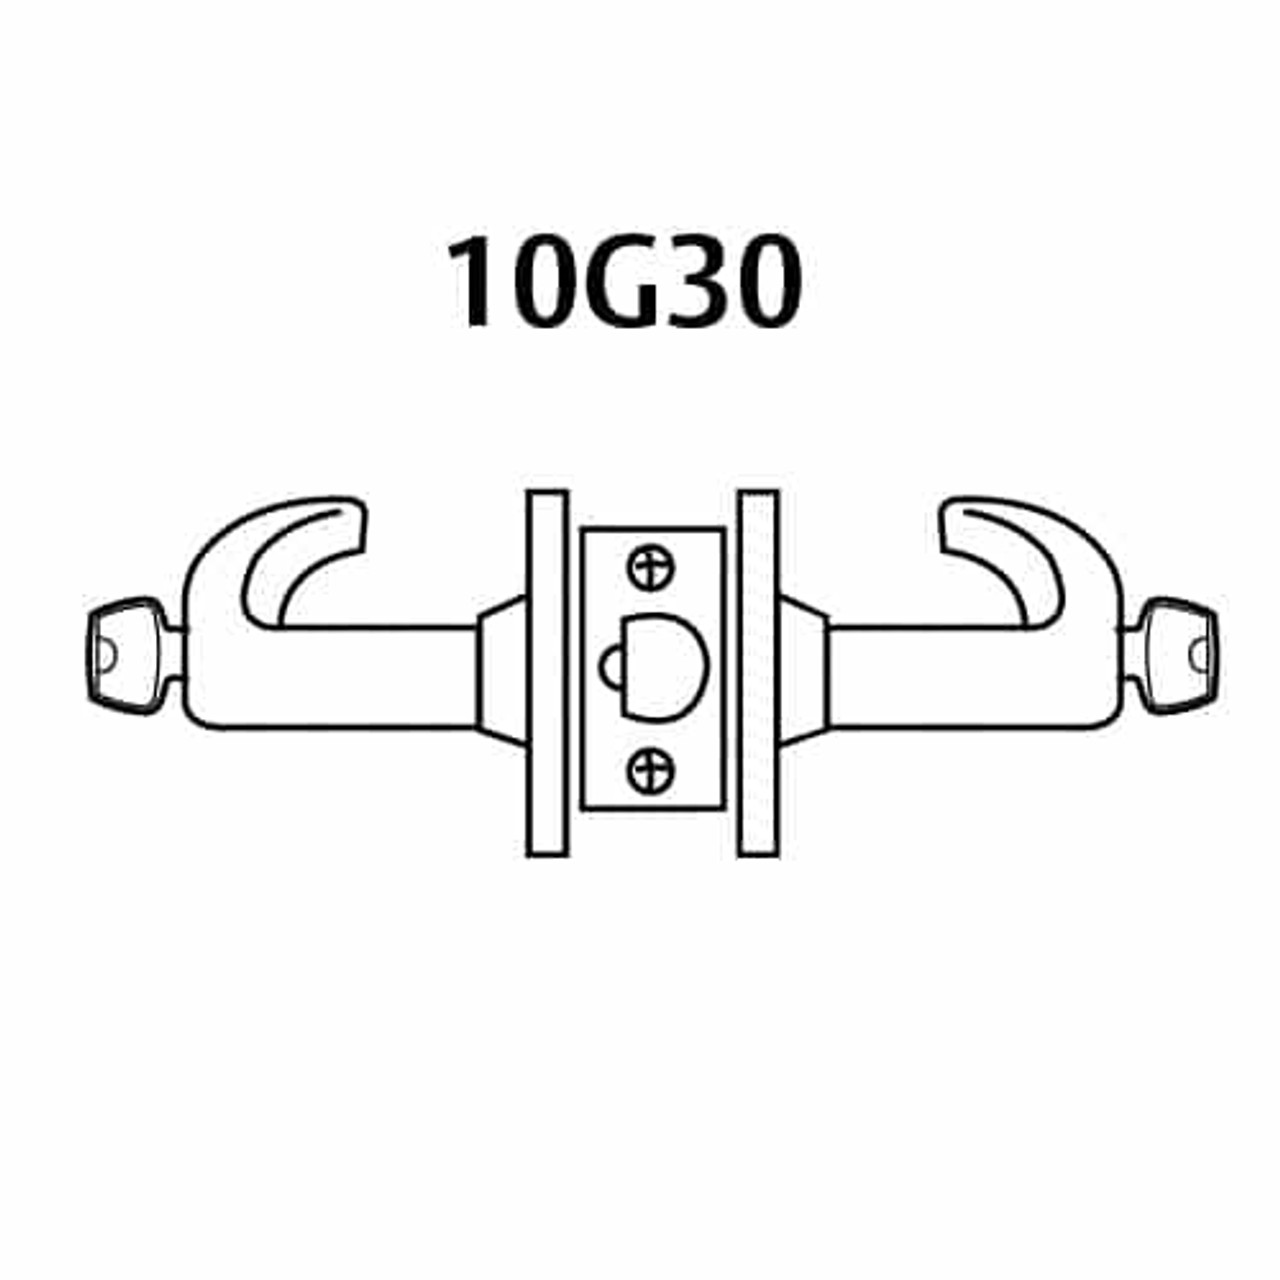 2860-10G30-GL-10 Sargent 10 Line Cylindrical Communicating Locks with L Lever Design and G Rose Prepped for LFIC in Dull Bronze